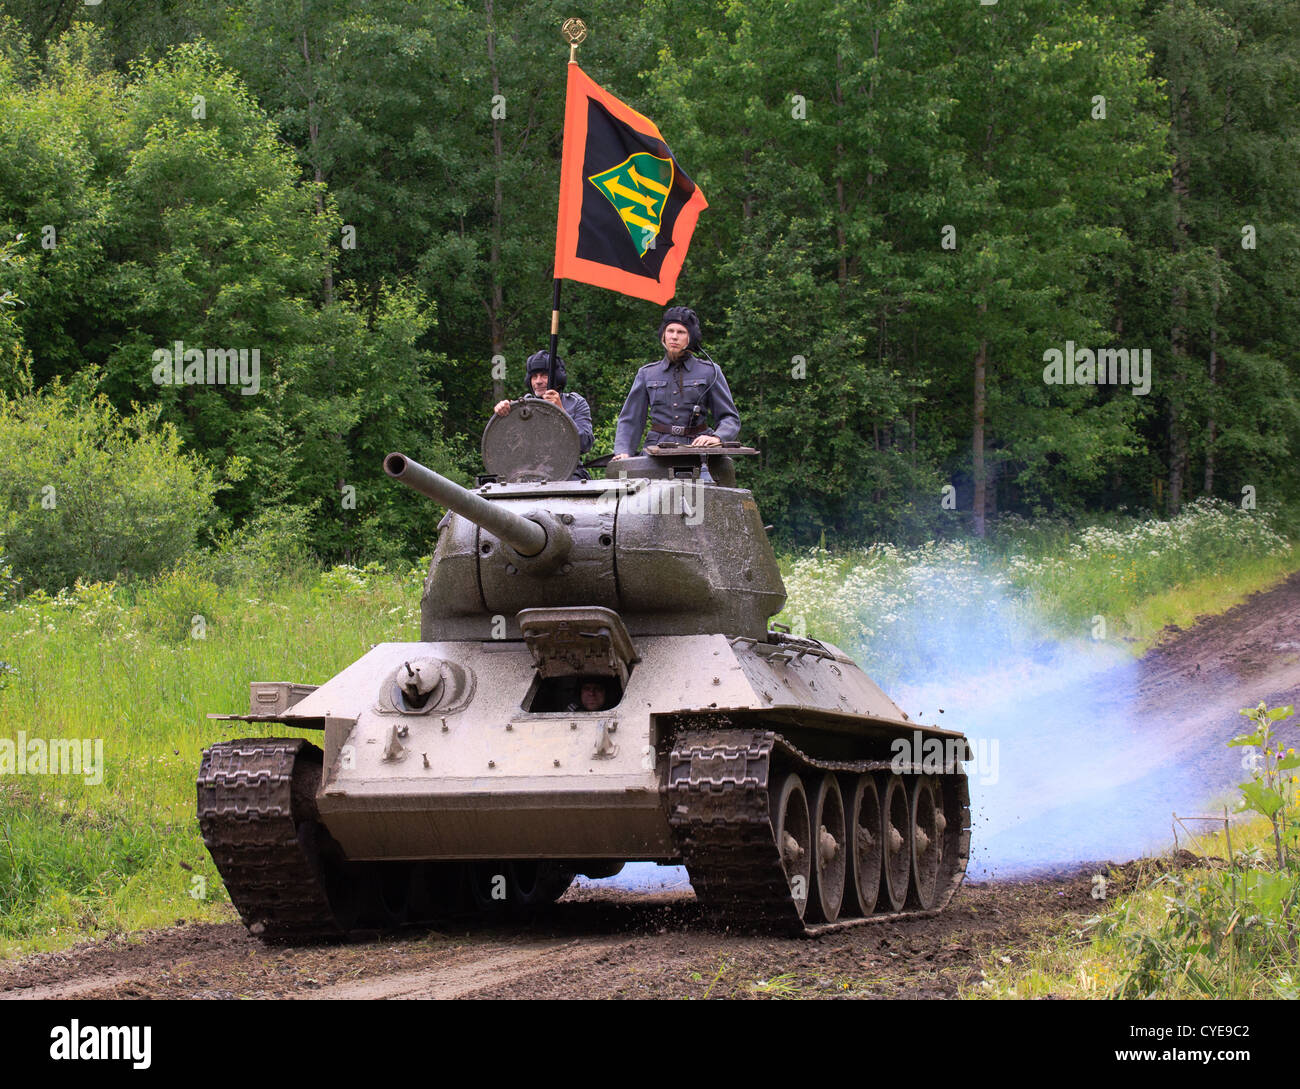 WW2 historic Soviet T-34 tank captured in combat by the Finns in parade with the Armored Division flag. Stock Photo